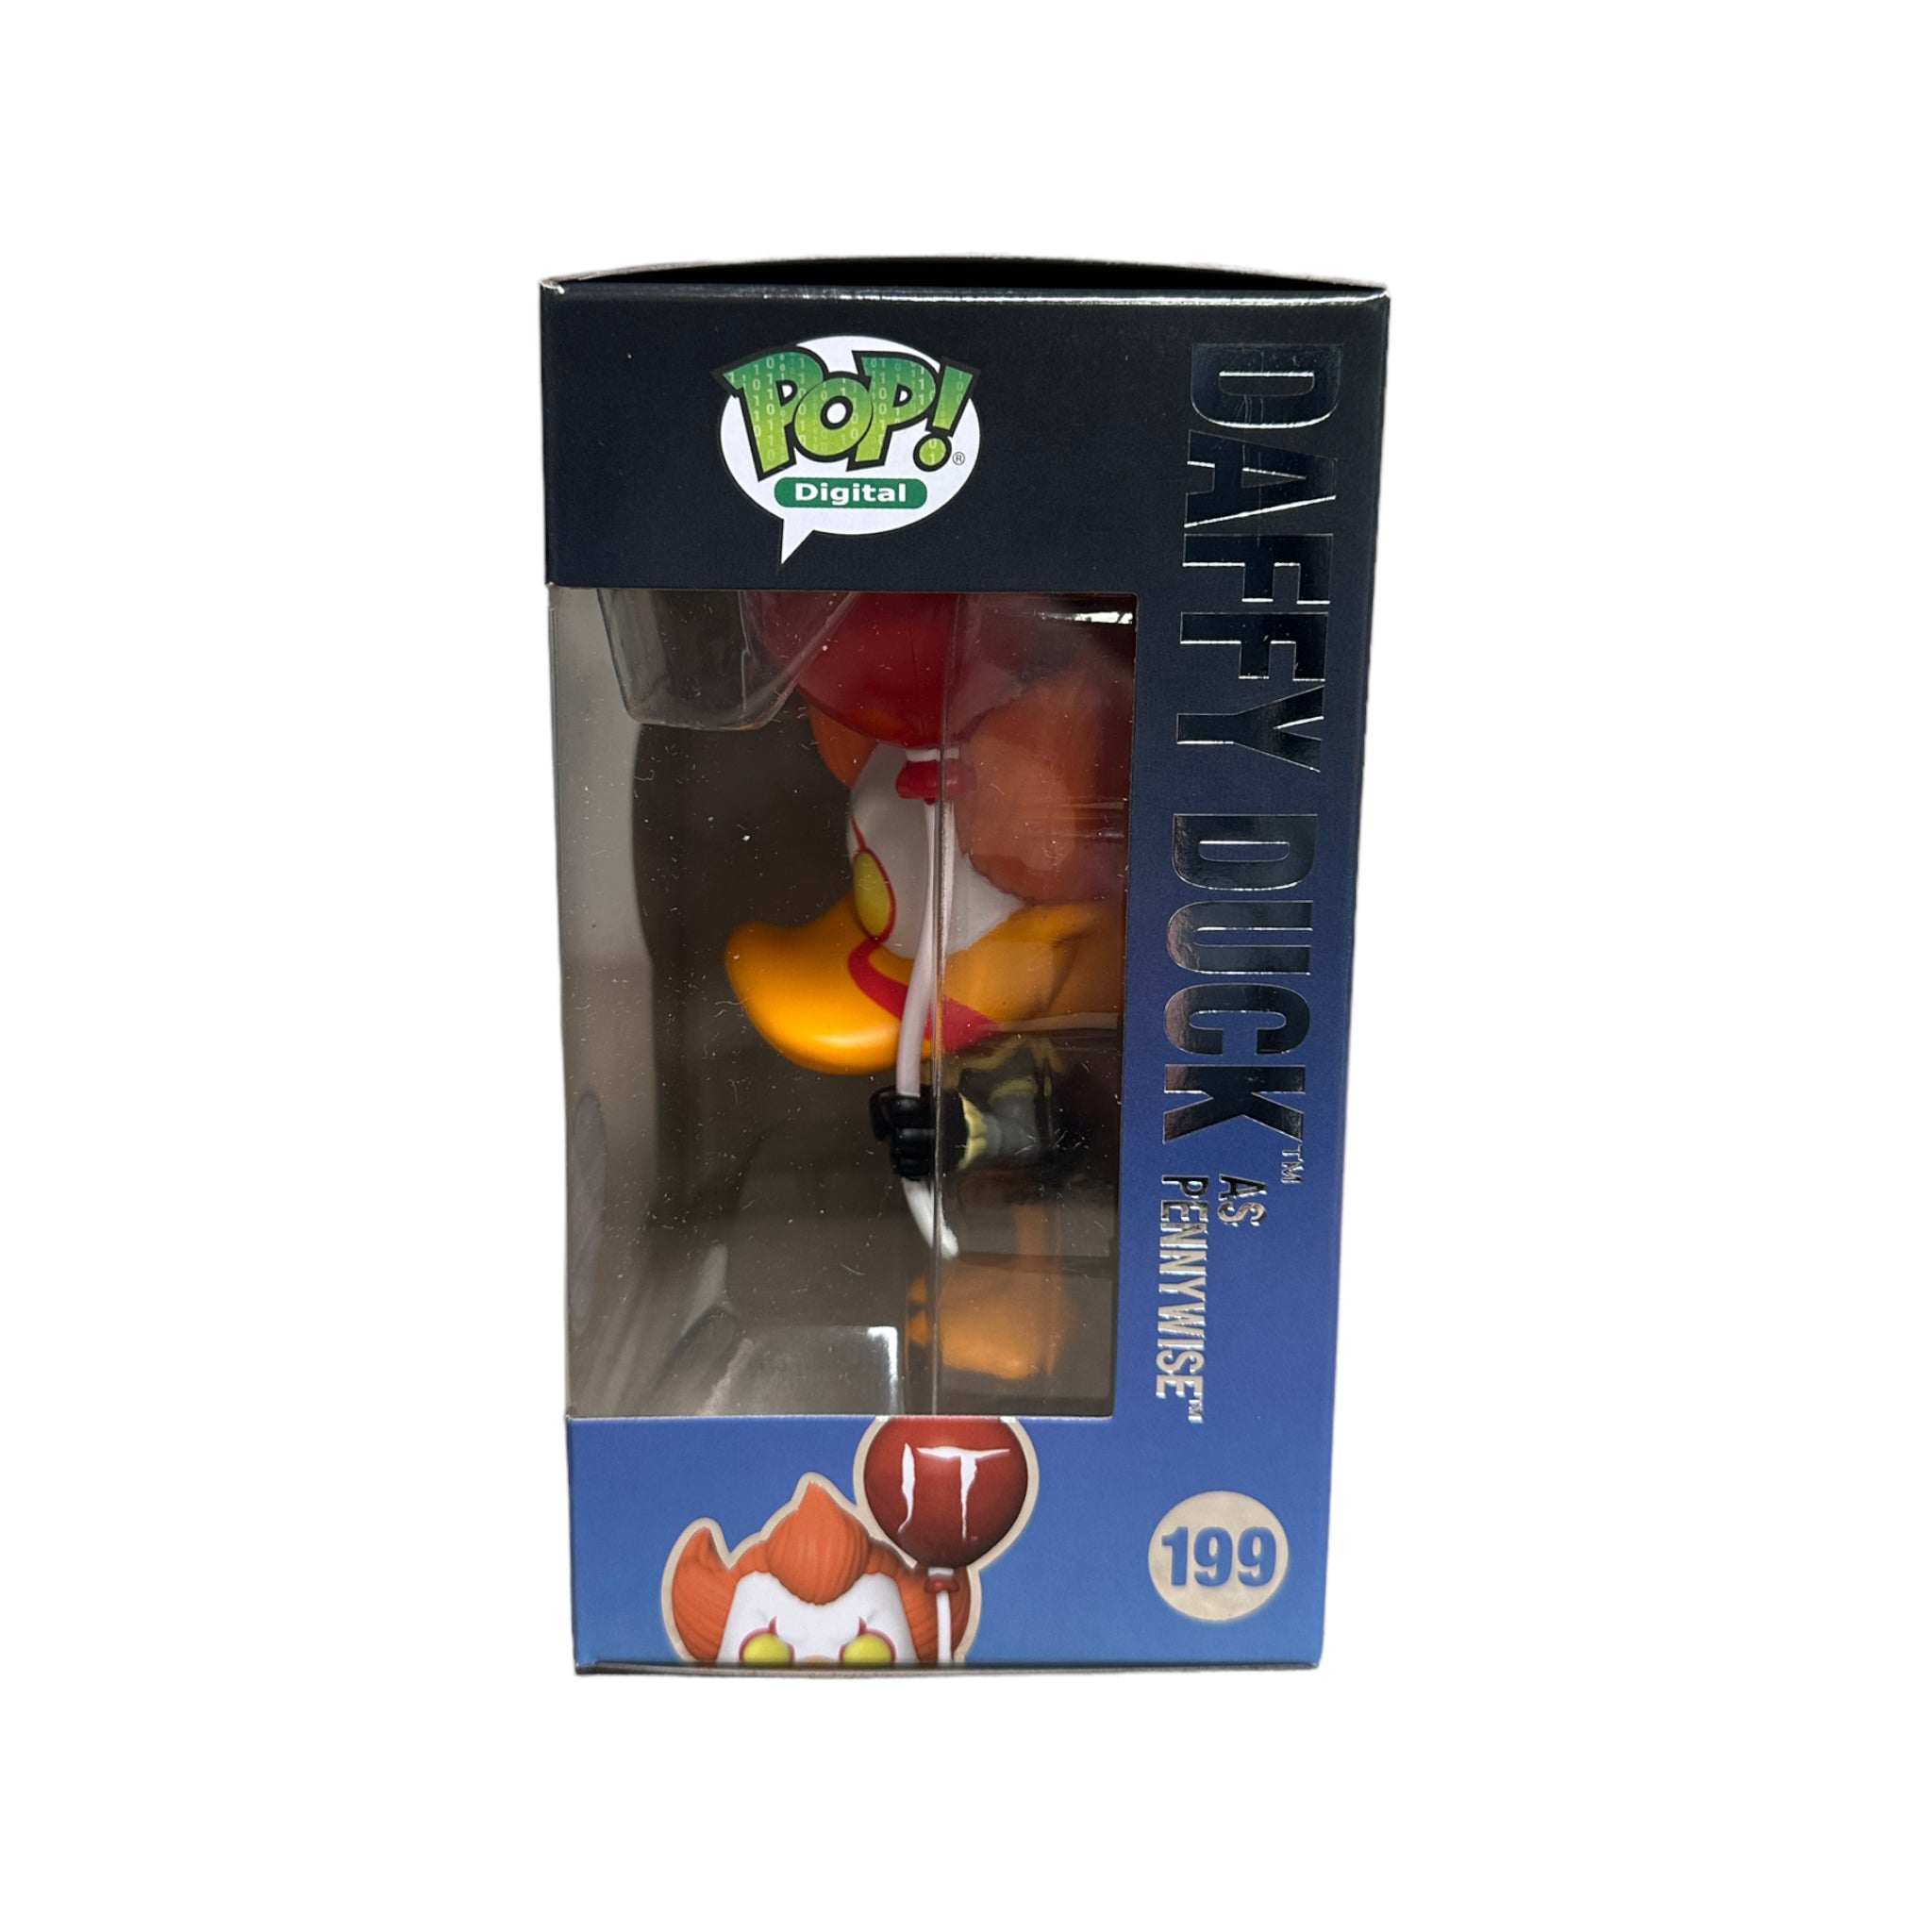 Daffy Duck as Pennywise #199 Funko Pop! - WB 100 - NFT Release Exclusive LE1900 Pcs - Condition 9.5/10